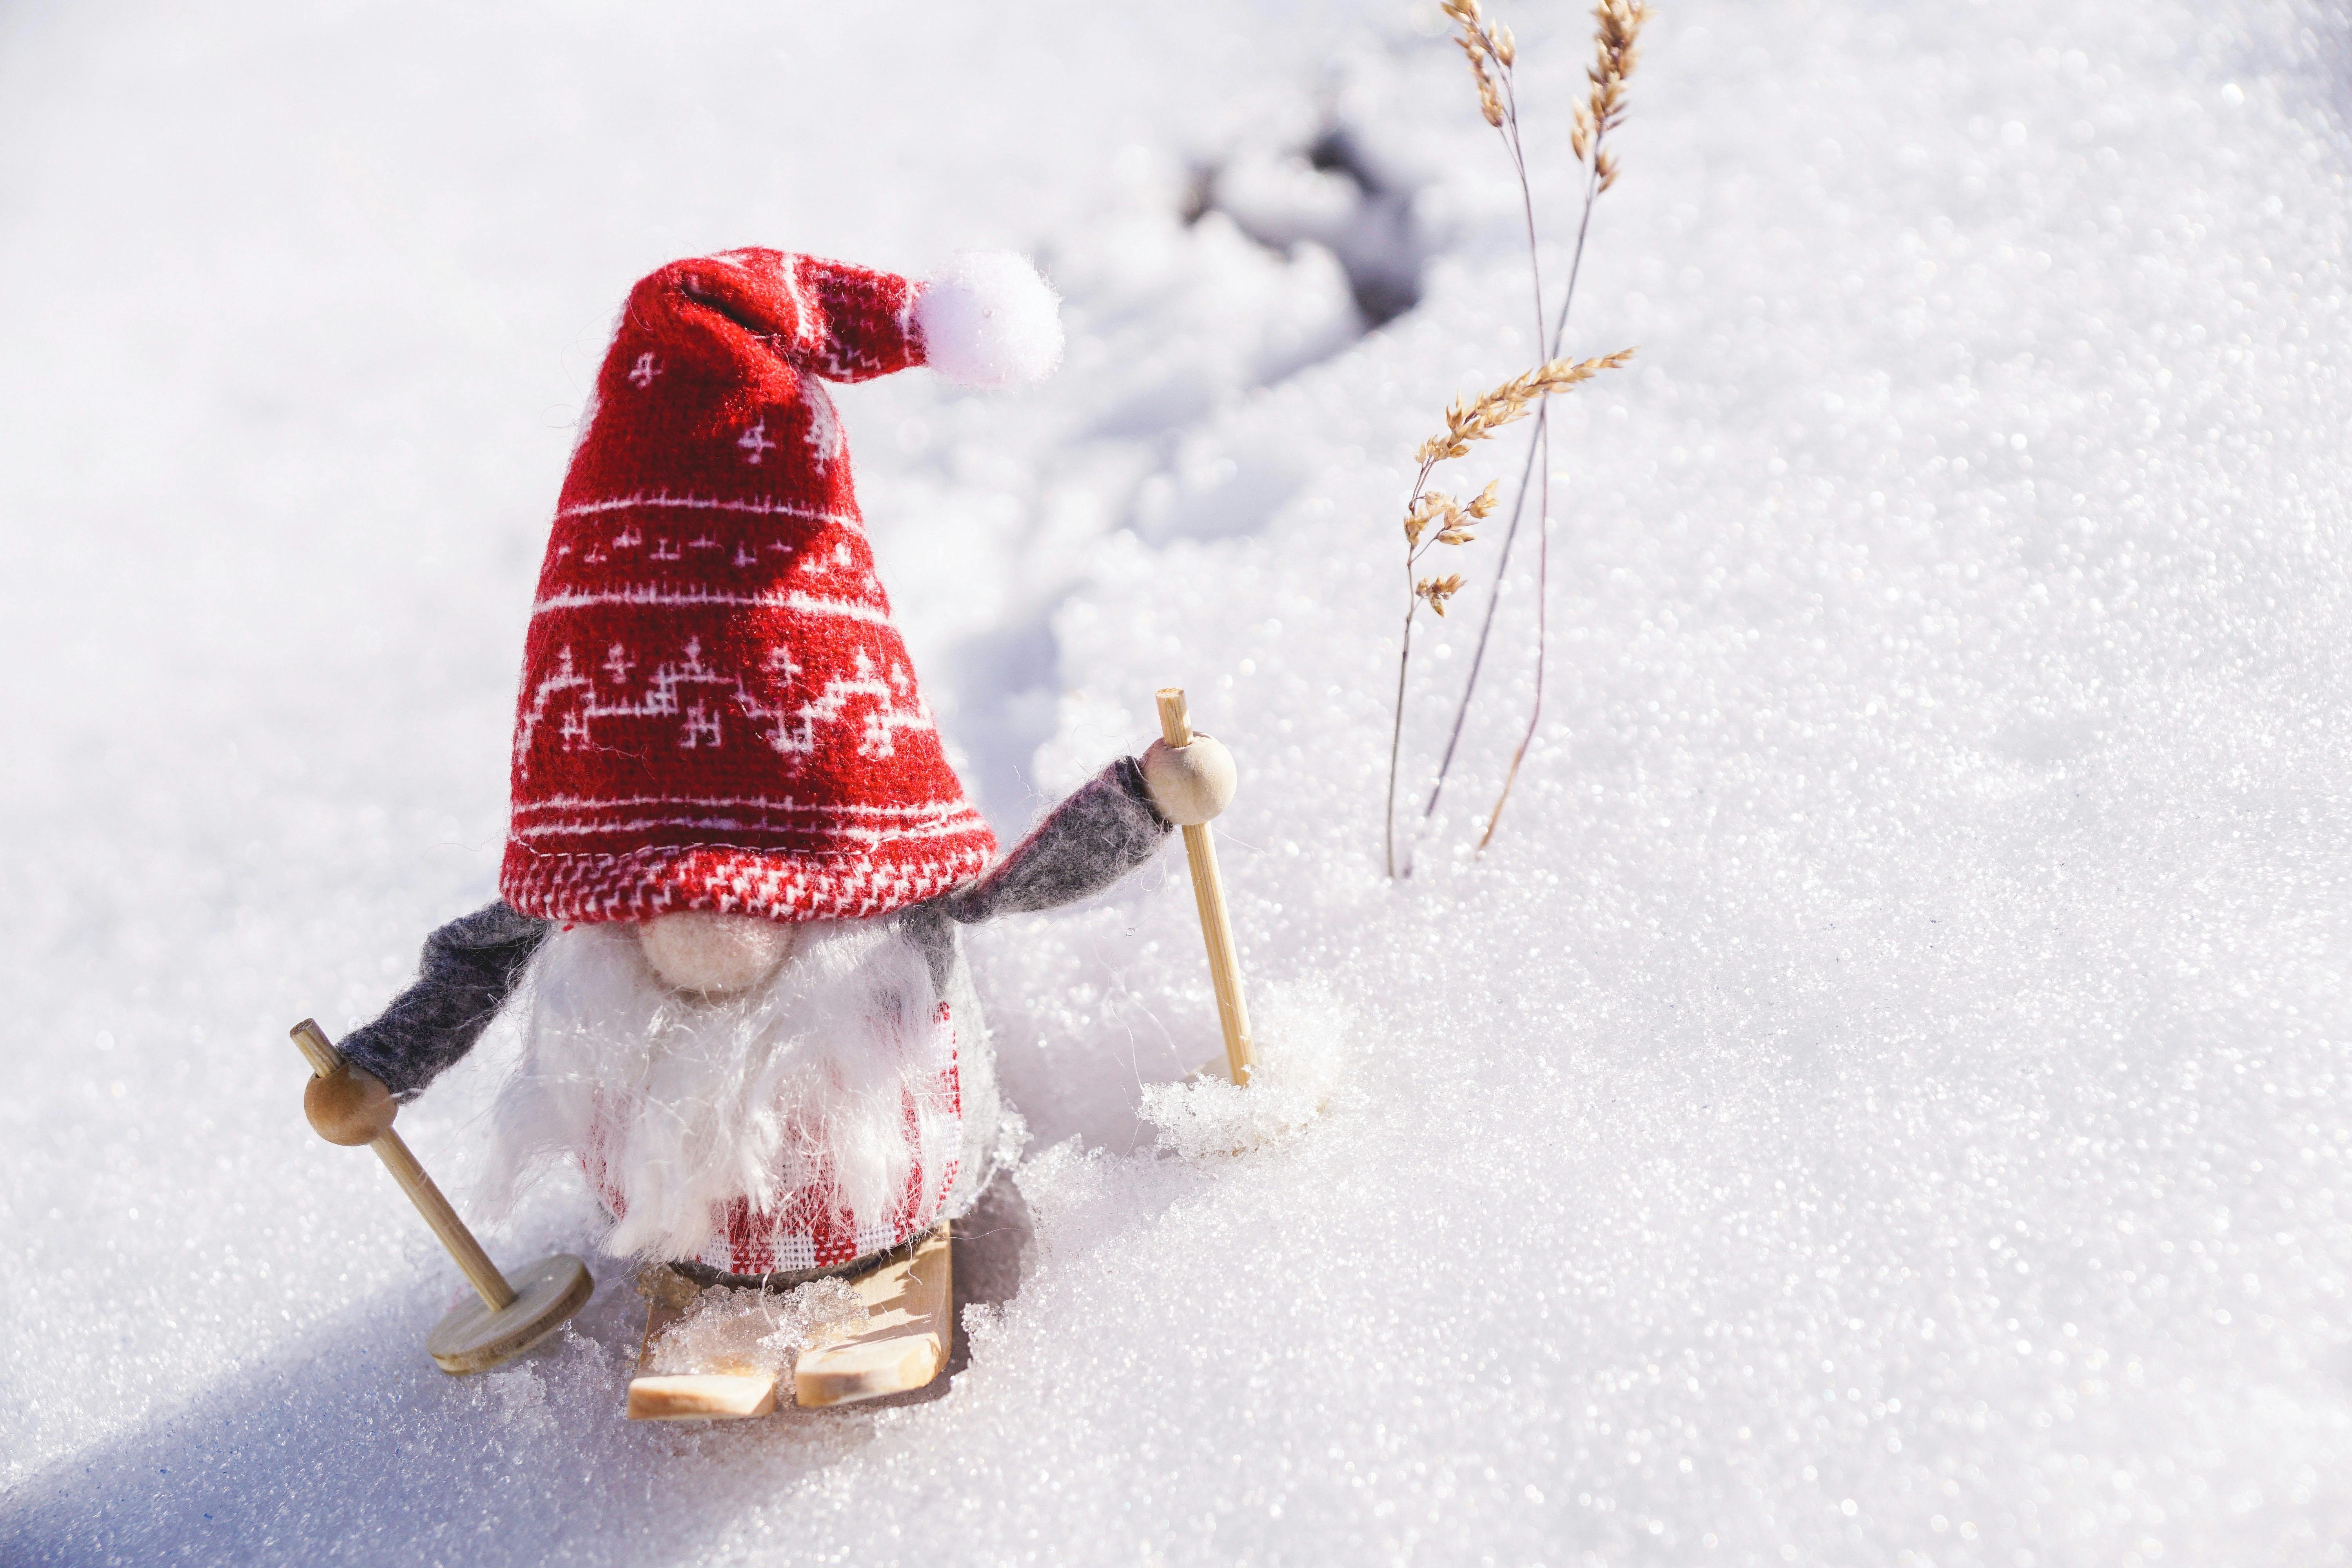 A small wooden gnome with a red hat on skis